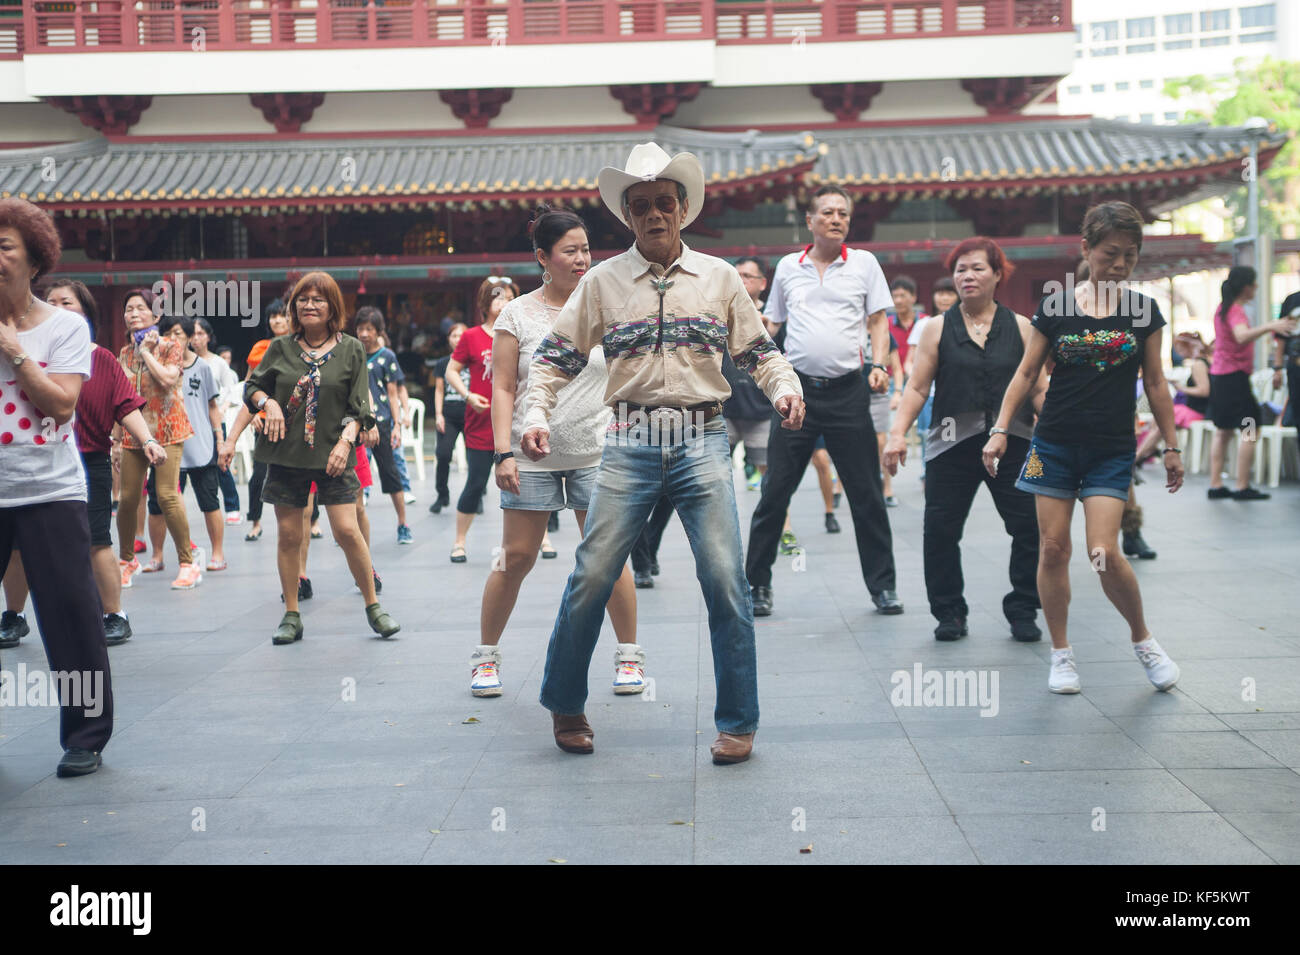 22.10.2017, Singapore, Republic of Singapore, Asia - A group of elderly people meet on Sundays for their line dance at a public square in Chinatown. Stock Photo